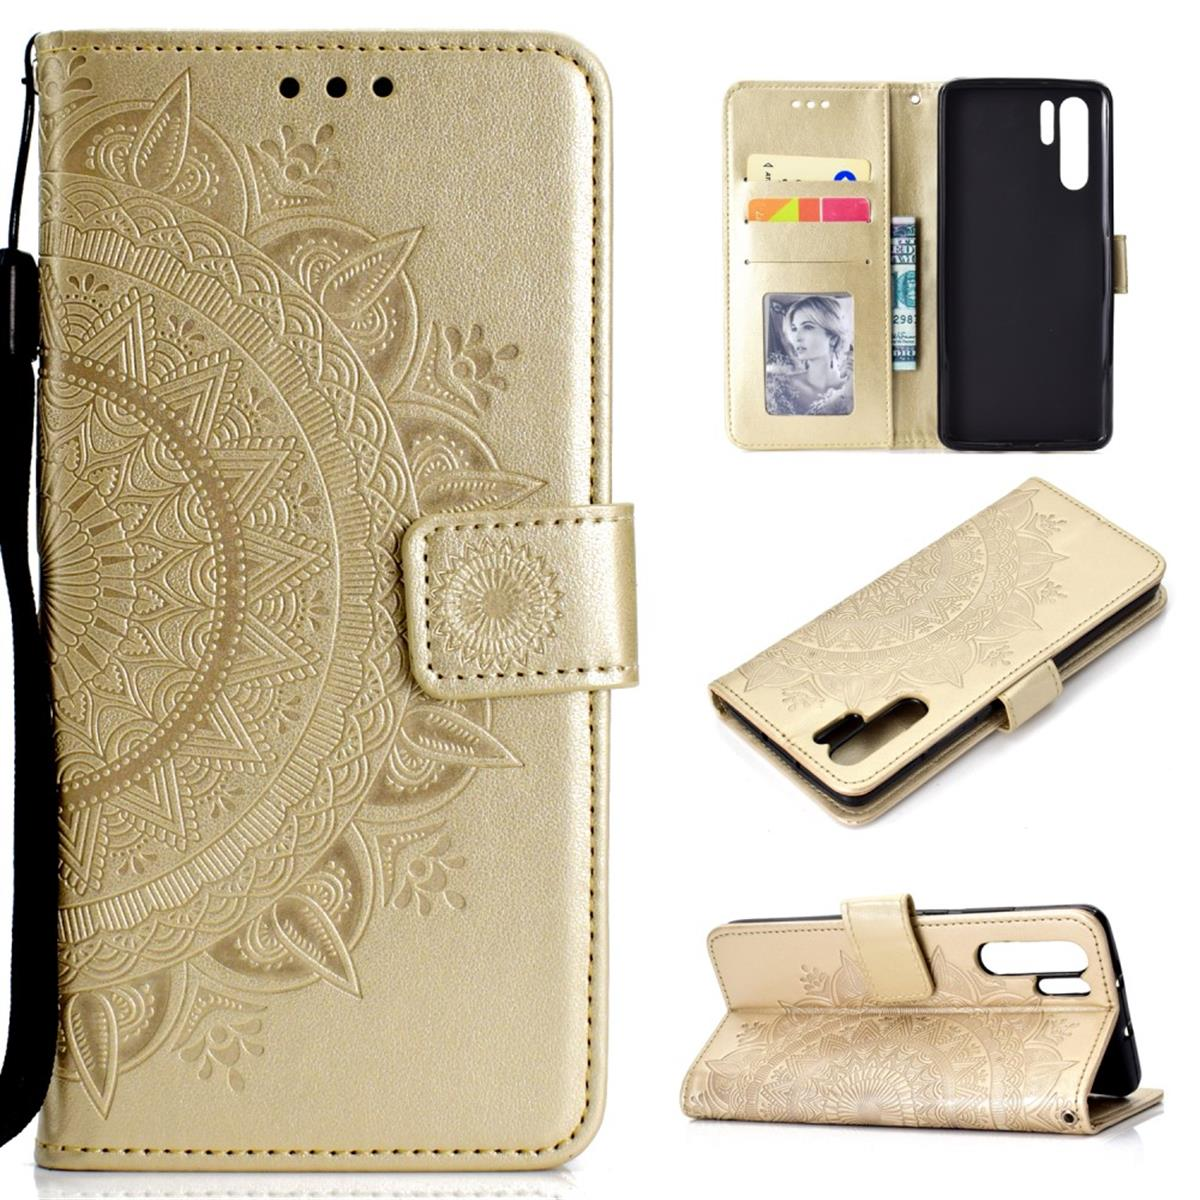 Pro, P30 COVERKINGZ Bookcover, Huawei, mit Muster, Gold Mandala Klapphülle